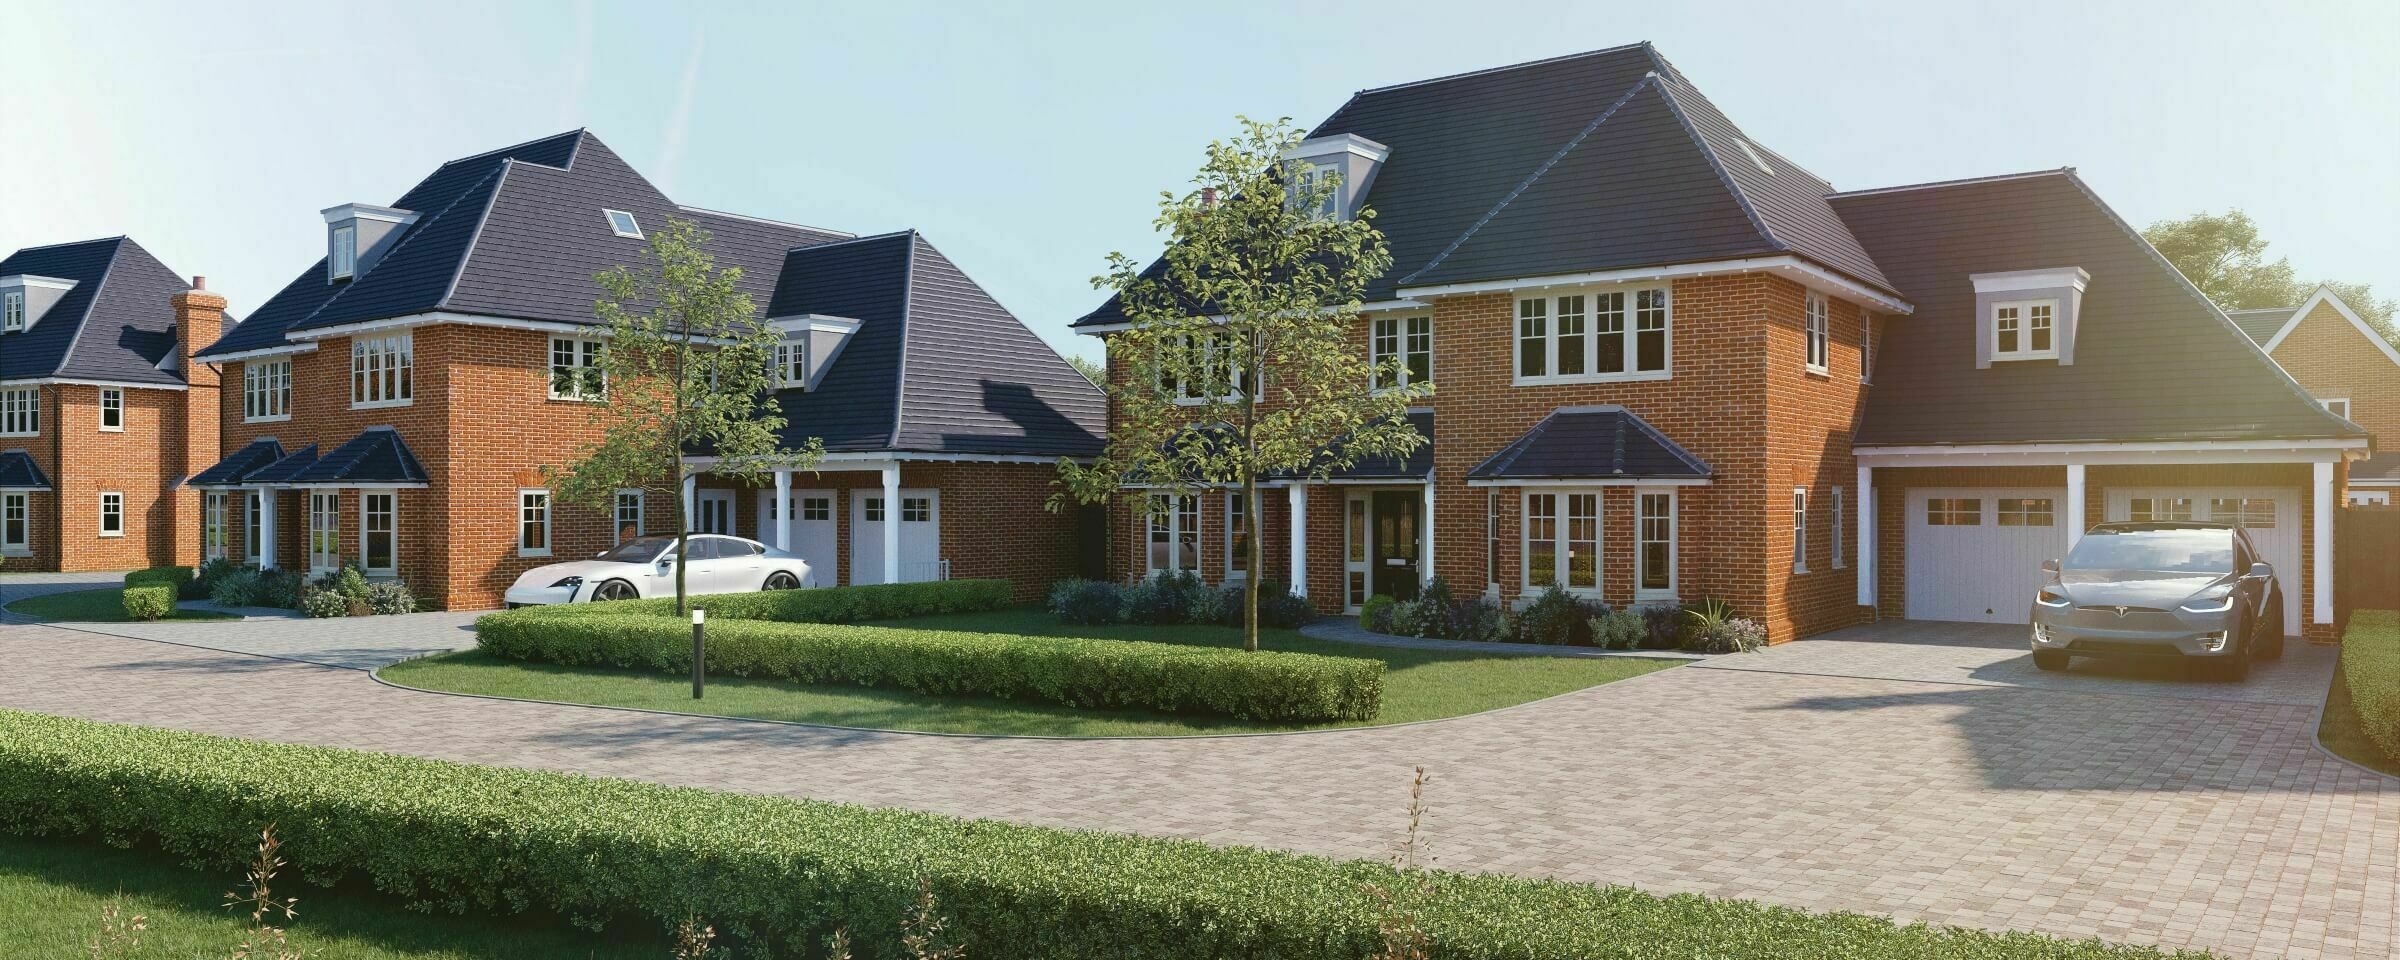 Stunning New Builds in Essex from Mersea Homes